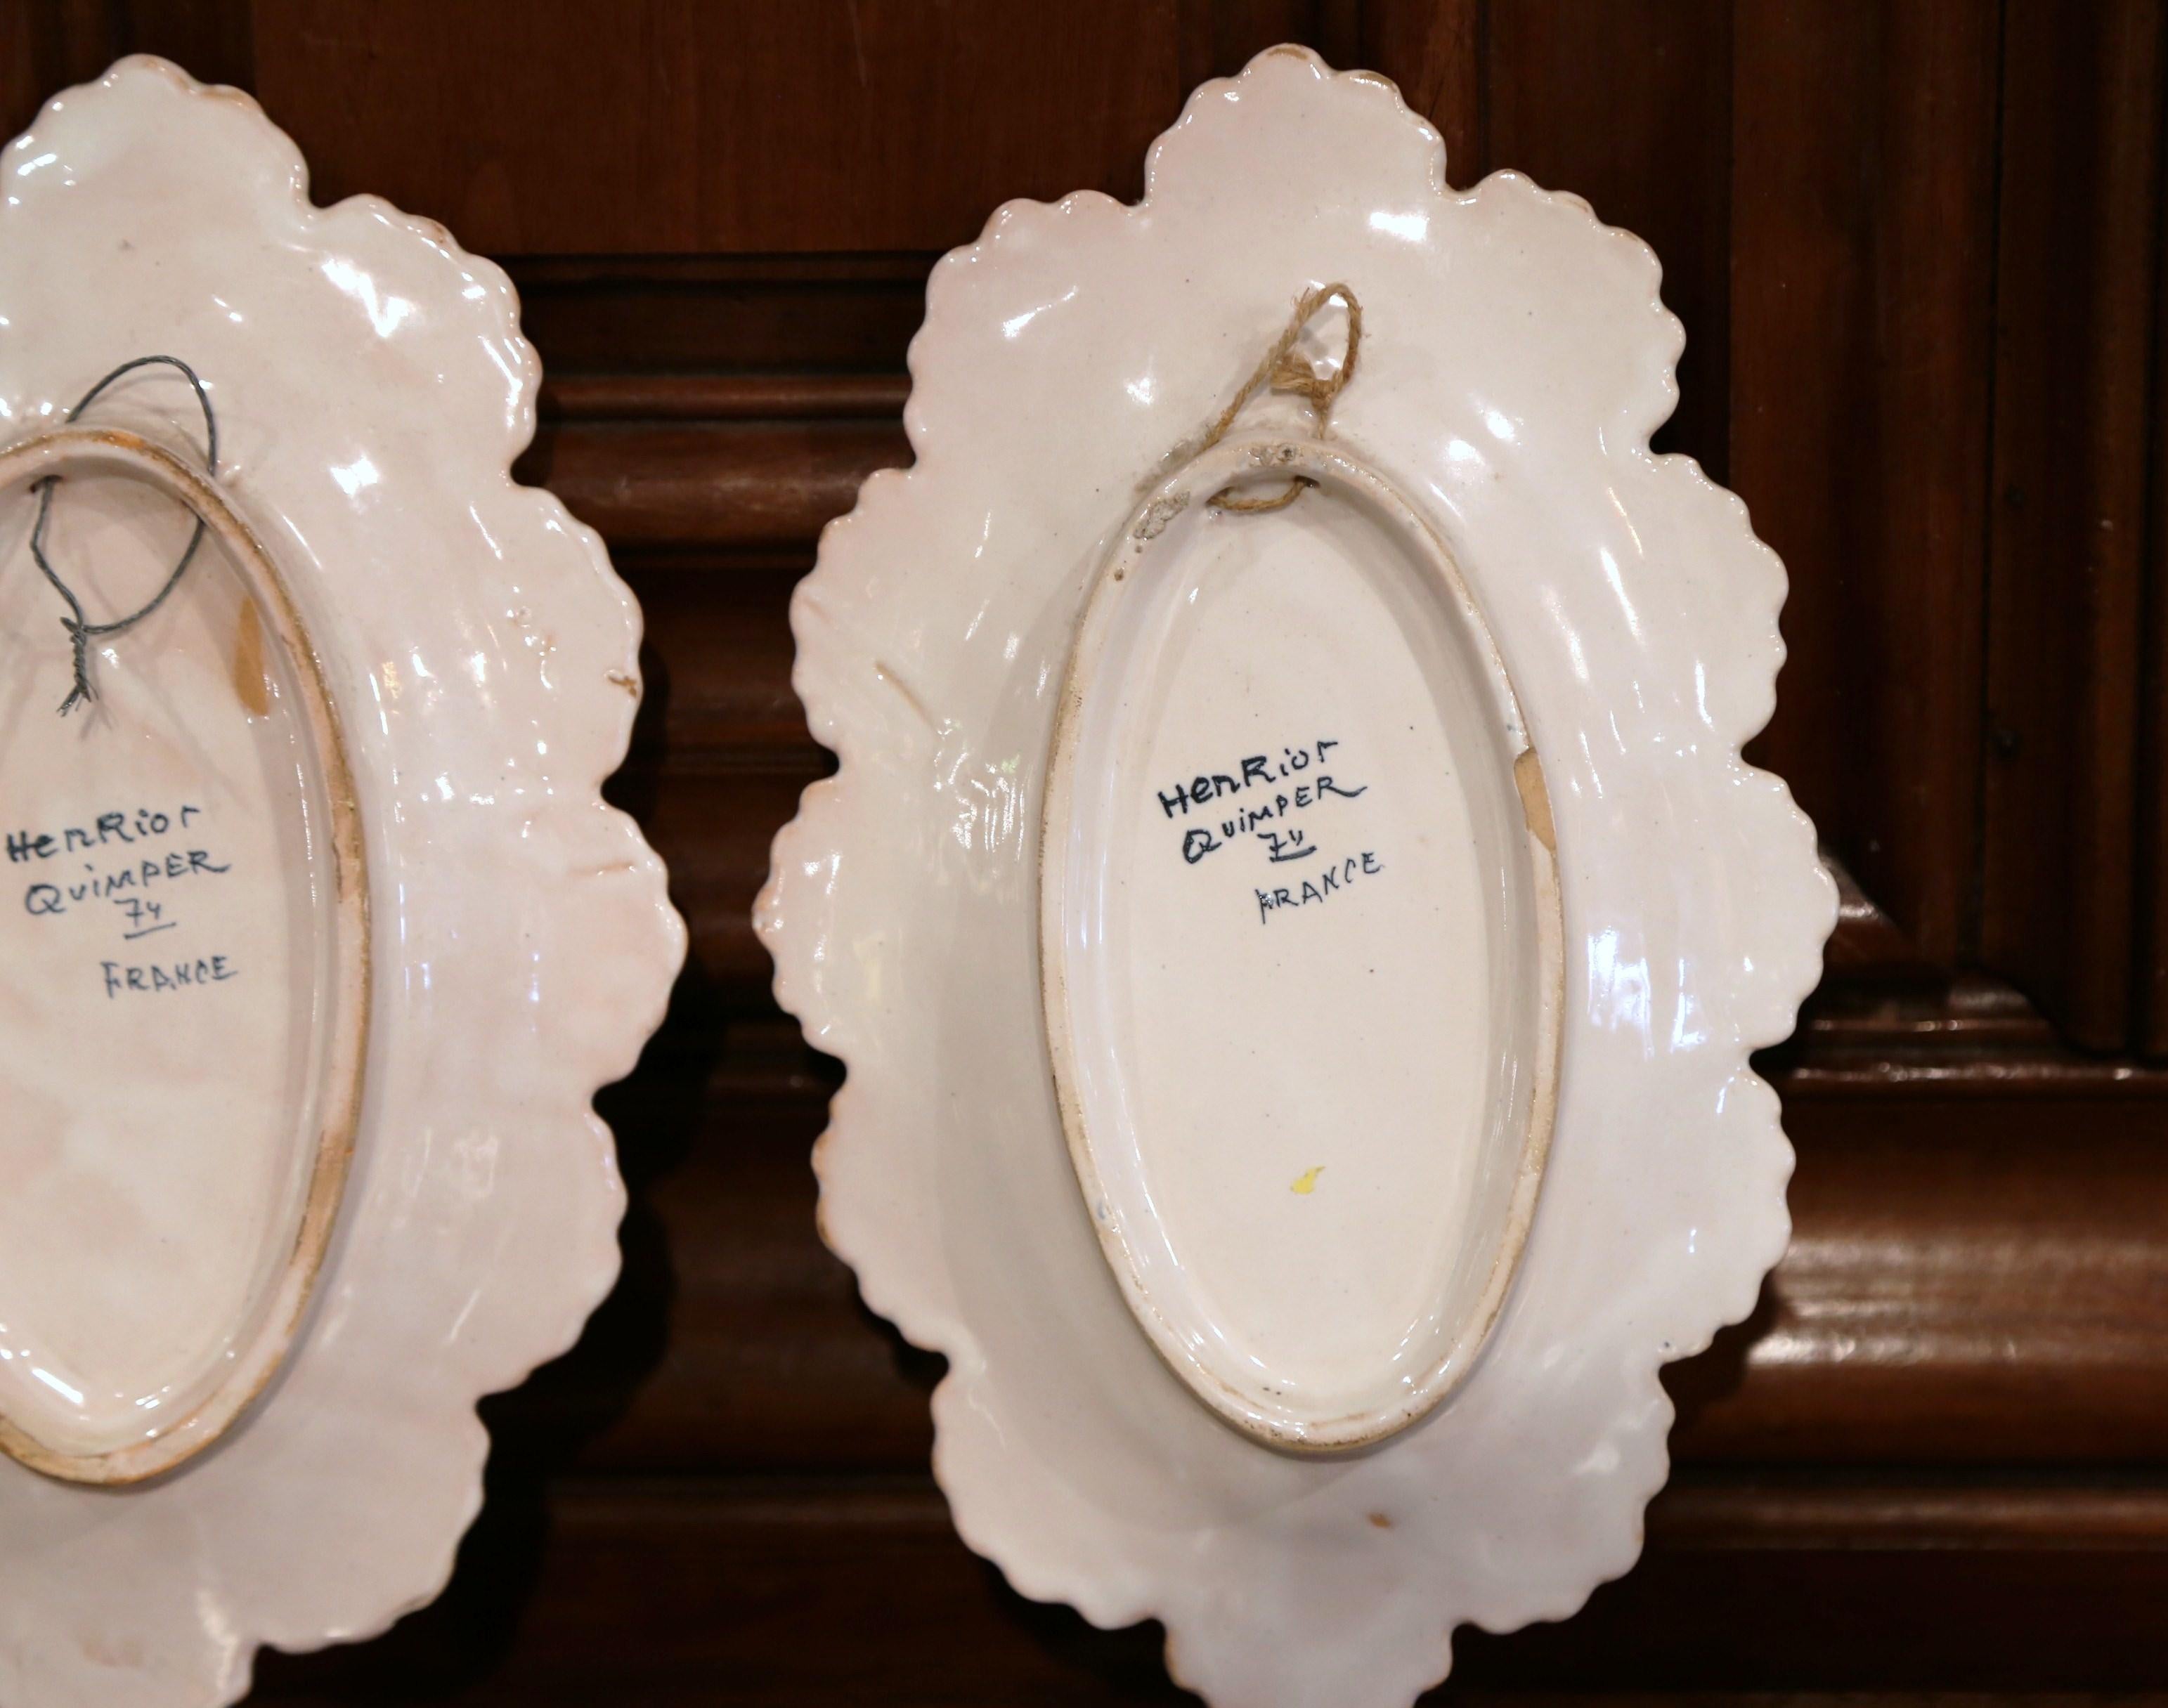 Pair of 19th Century French Faience Oval Wall Plates Signed Henriot Quimper 5